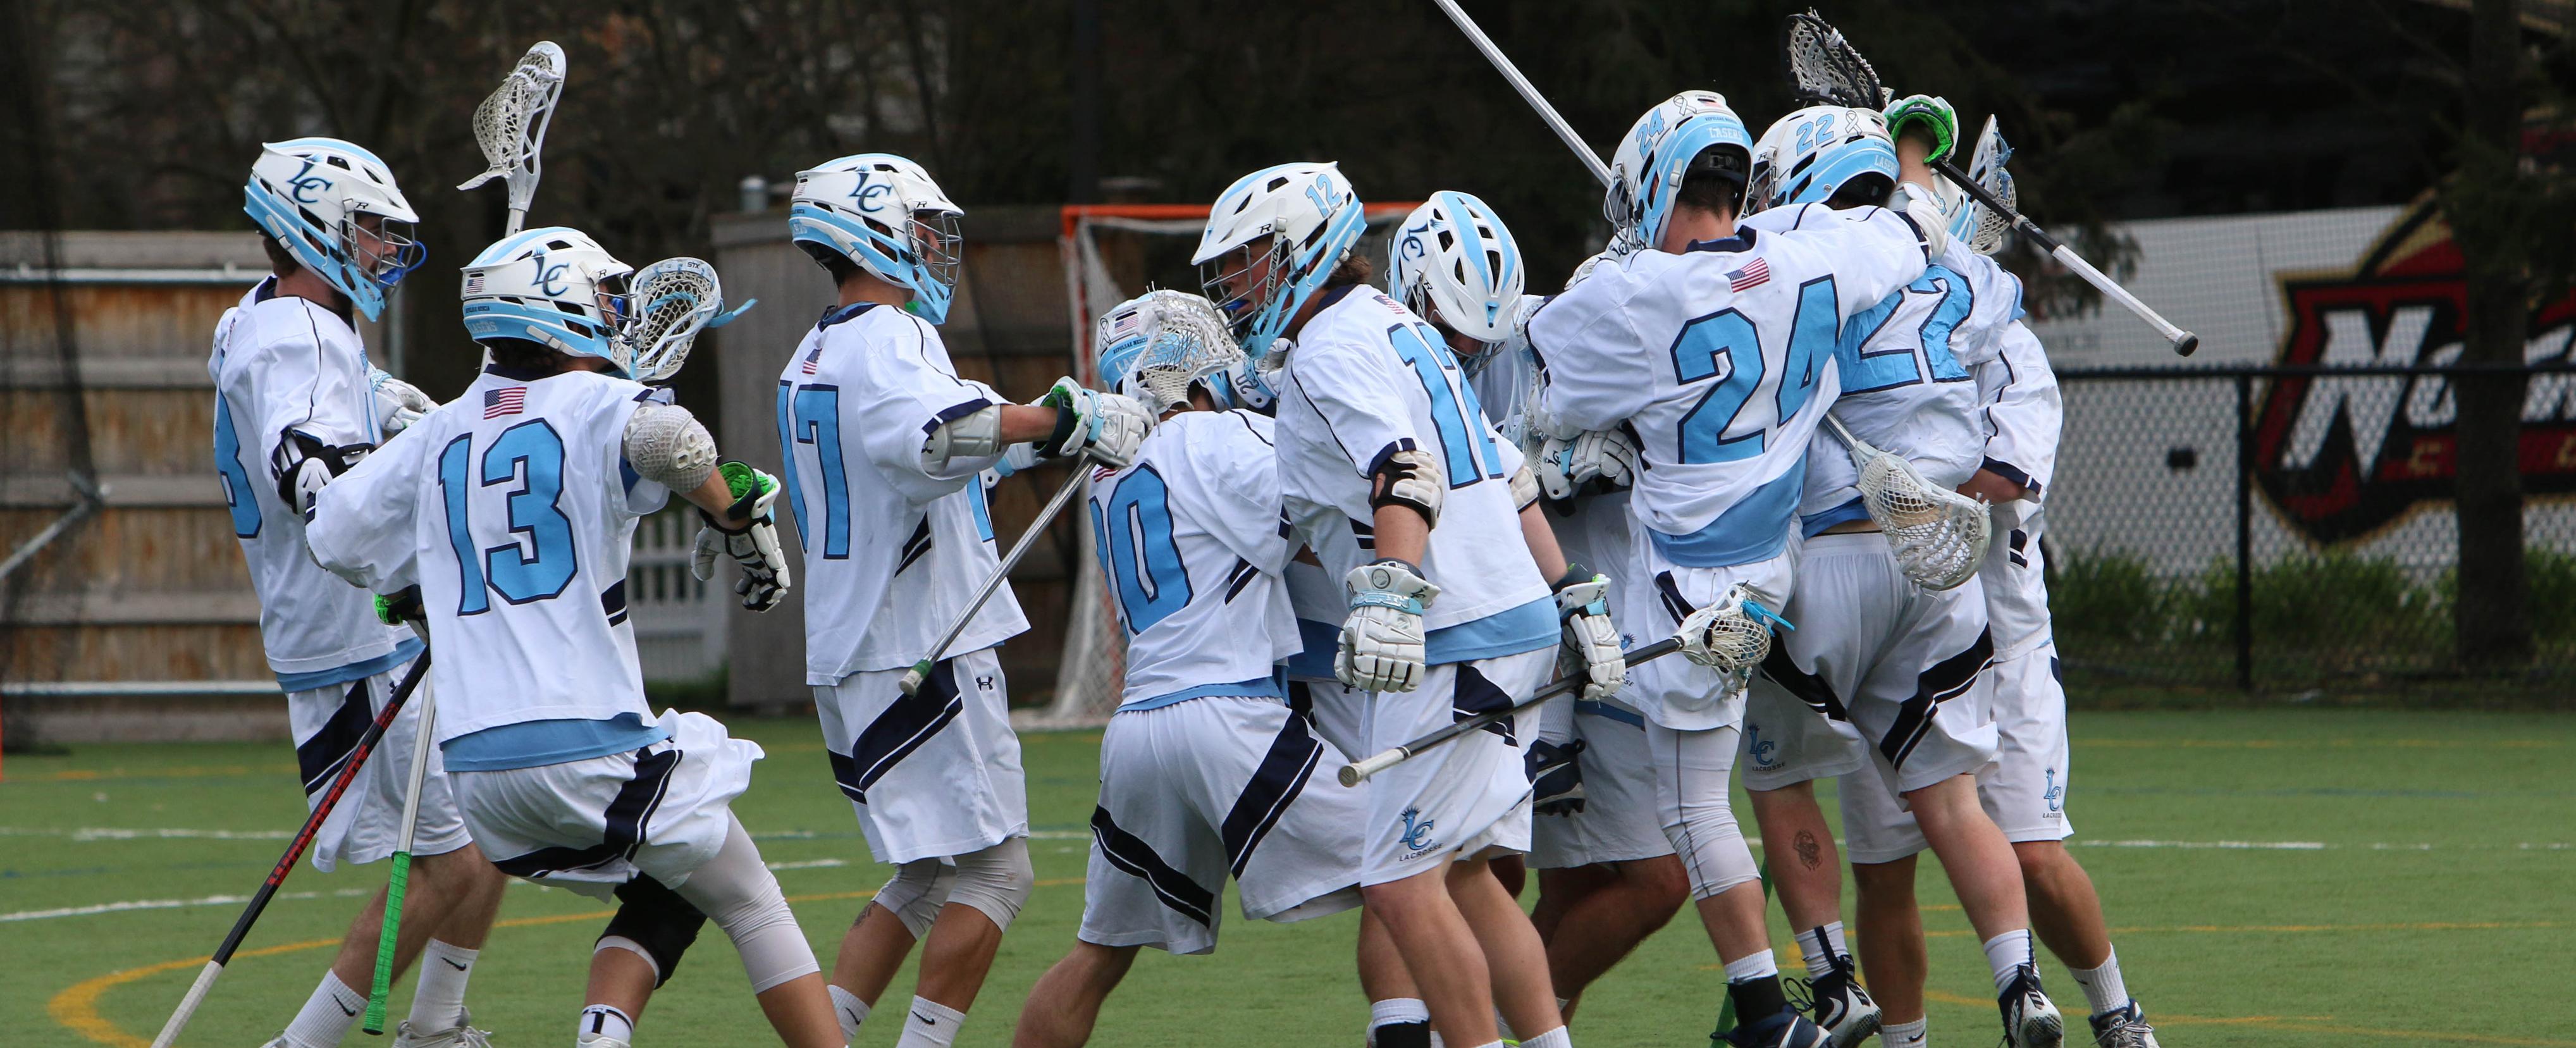 Men's Lacrosse is Championship Bound after 16-9 Win over Norwich